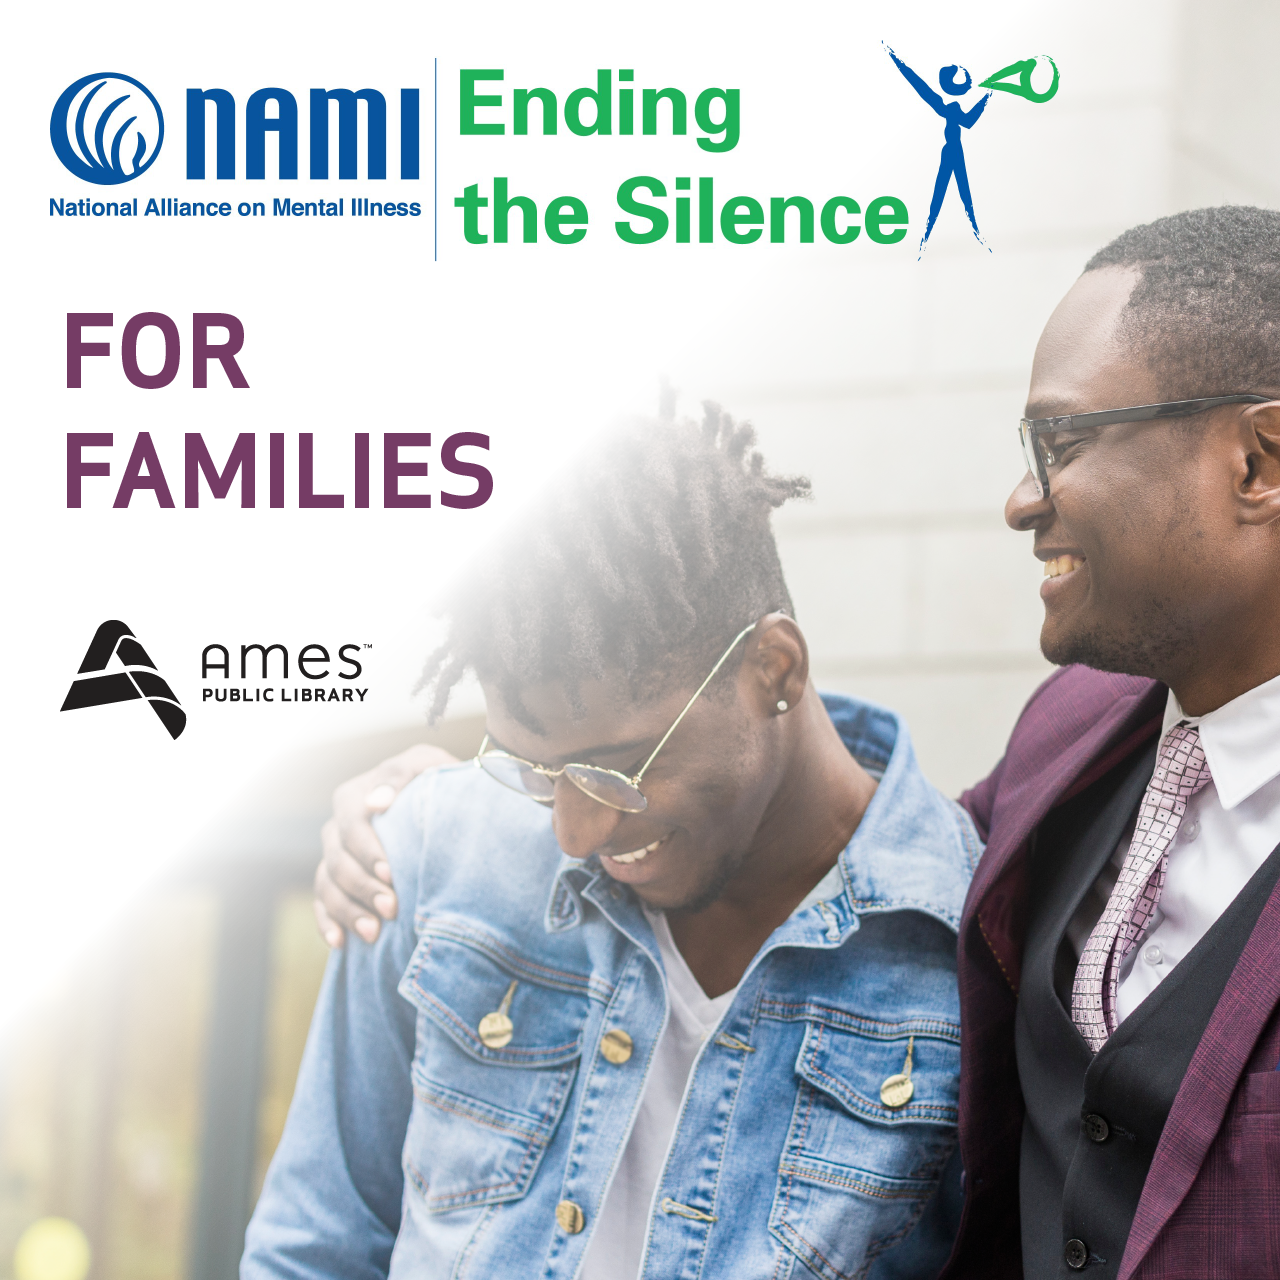 NAMI Ending the Silence for Families